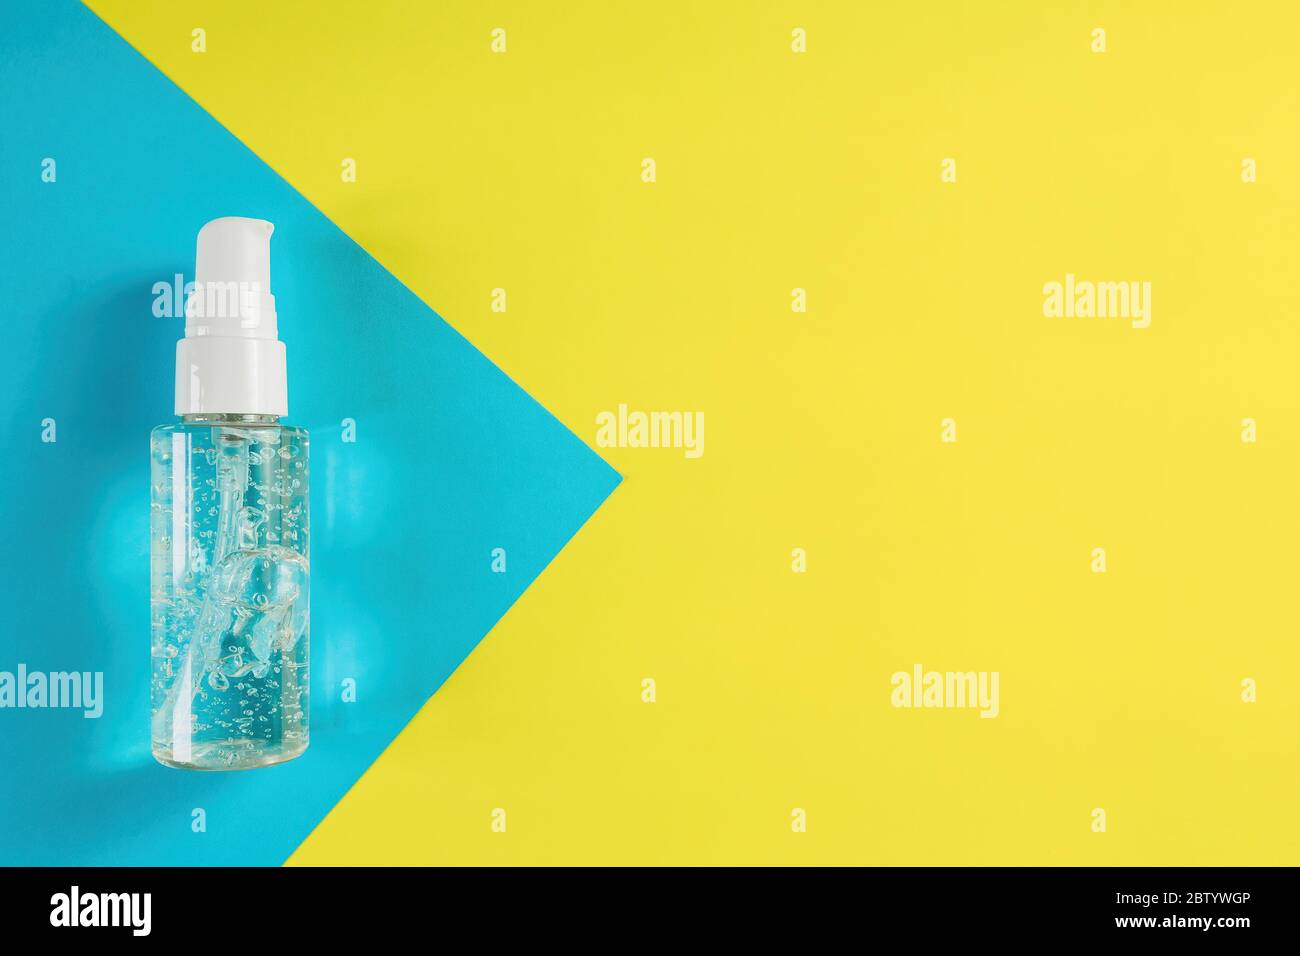 Alcohol gel on blue and yellow background. Top view of antibacterial soap sanitizer. Hygiene concept for prevent the spread corona virus. Copy space Stock Photo